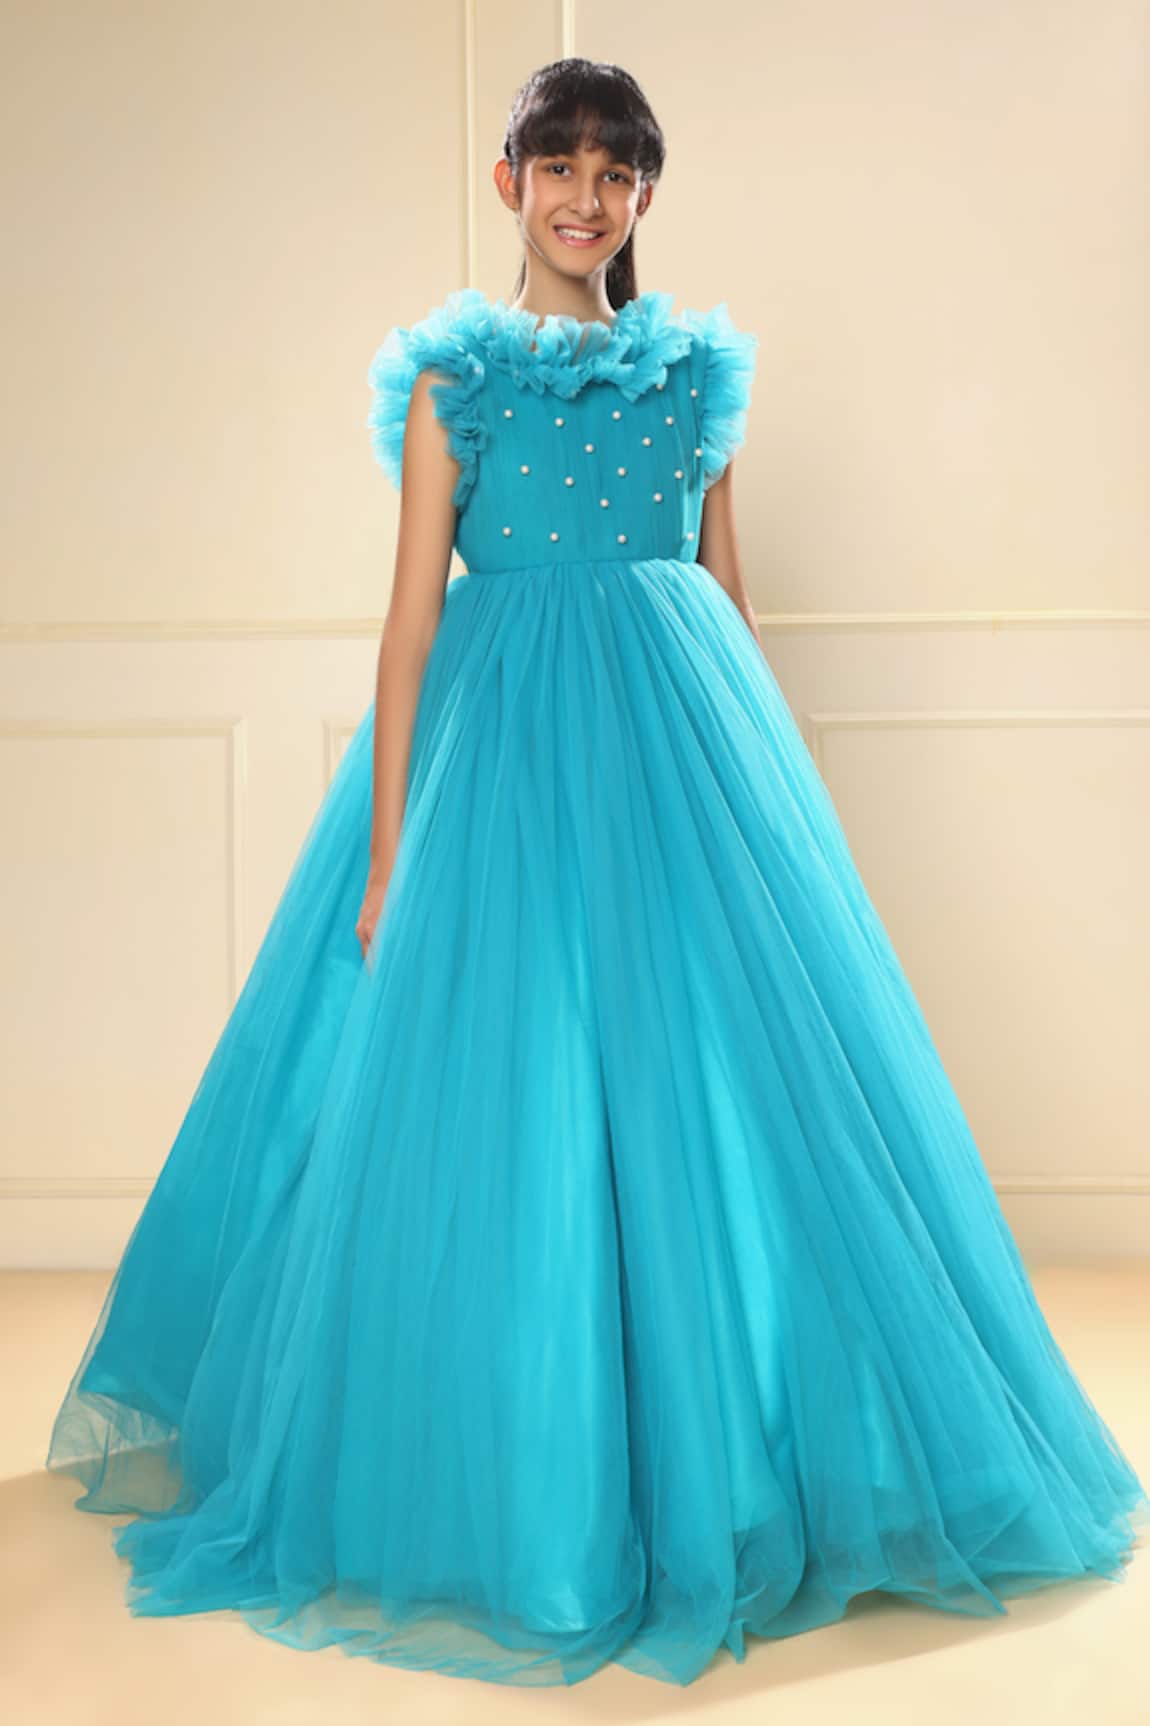 Kids Party Dresses, Trendy Gowns for Girls Age 1-5, 6-8, 9-14 Years |  TrendyGowns